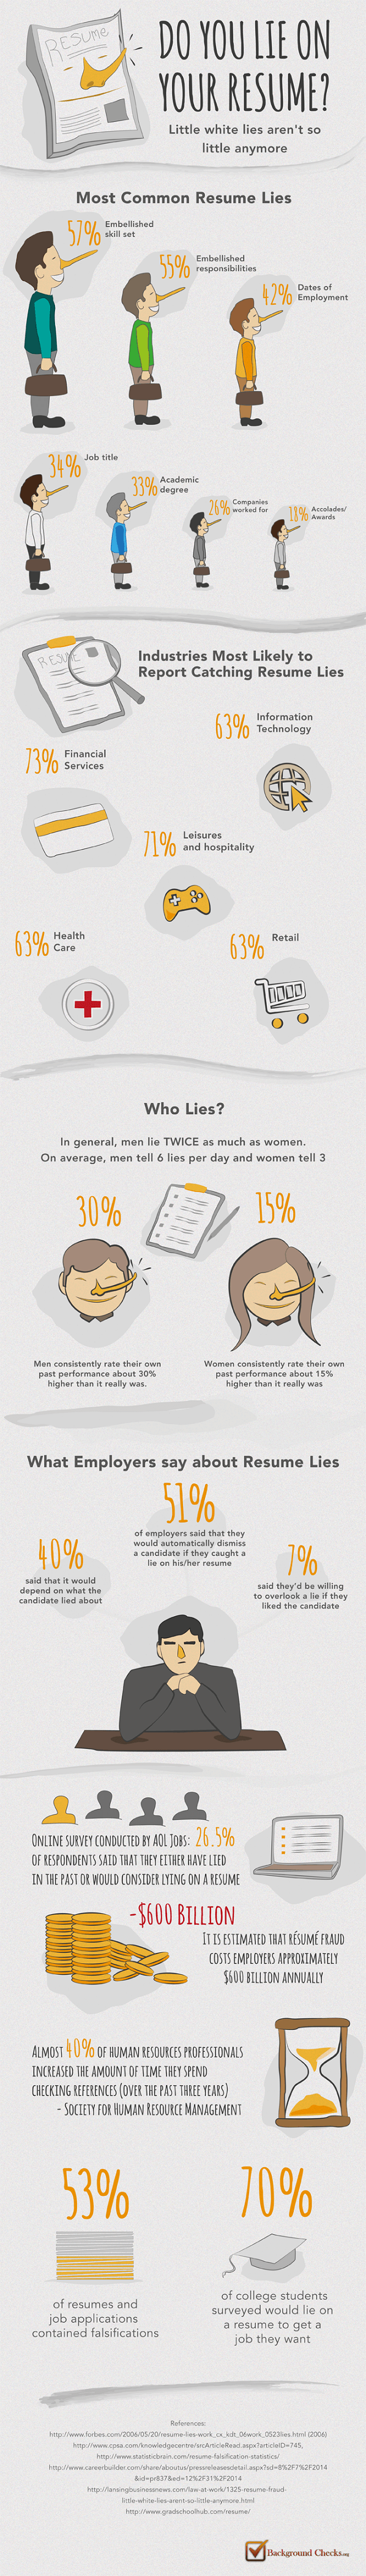 liar-liar-resume-on-fire-infographic